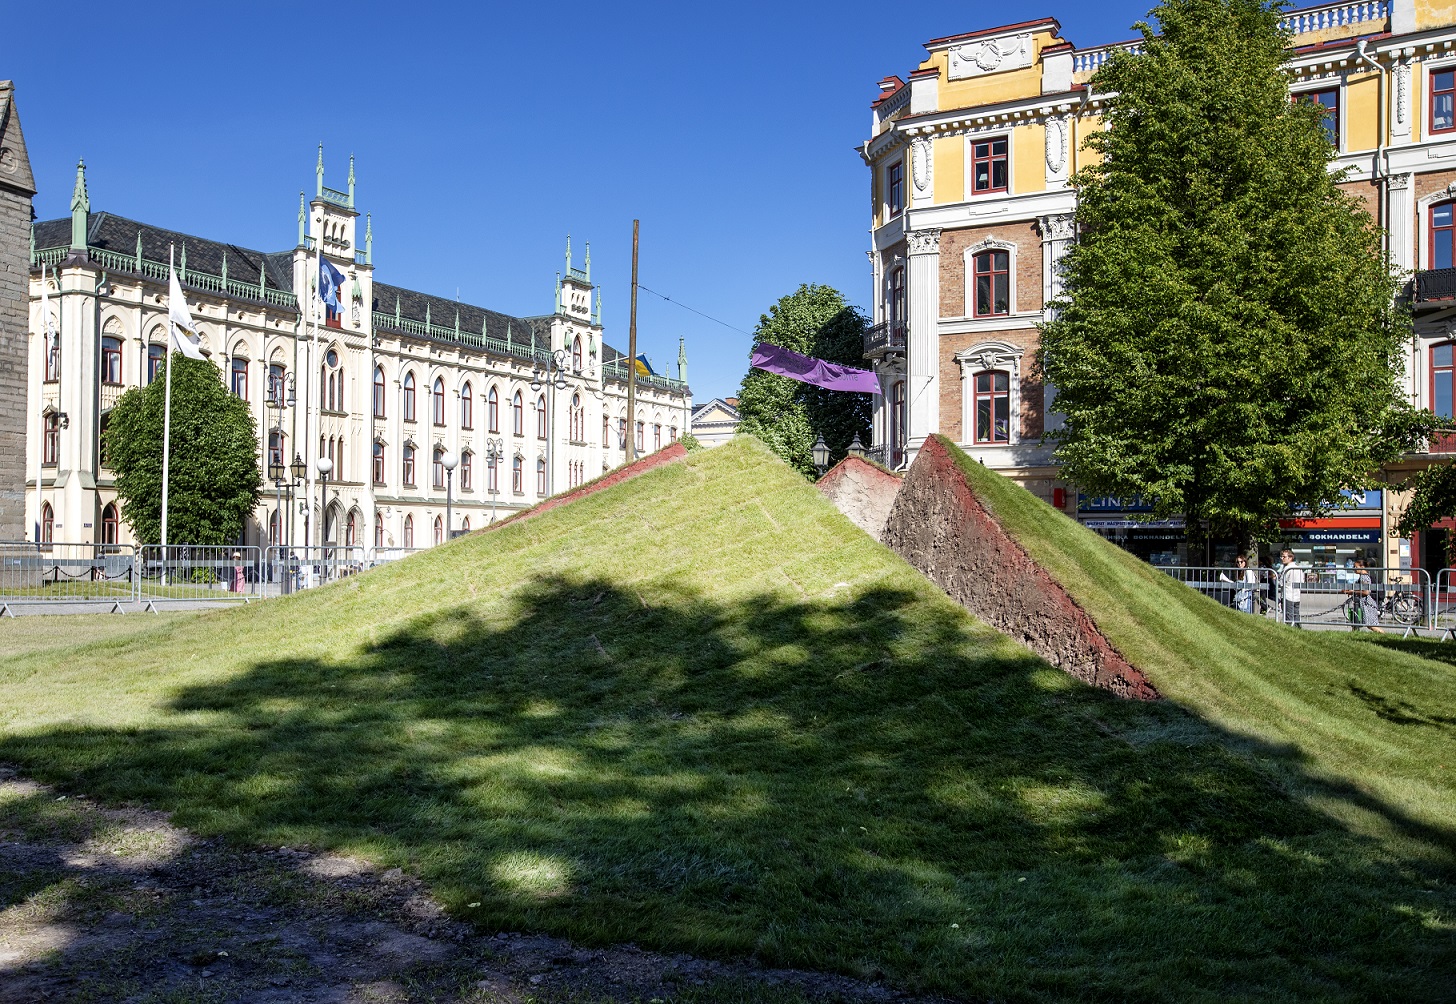 The lawn in front of Saint Nicolai Church has opened up like a wound from the underground. The work is made up of earth and grass that break up from the ground in small pyramid shapes that create a hole in the middle. In the background you can see the town hall.